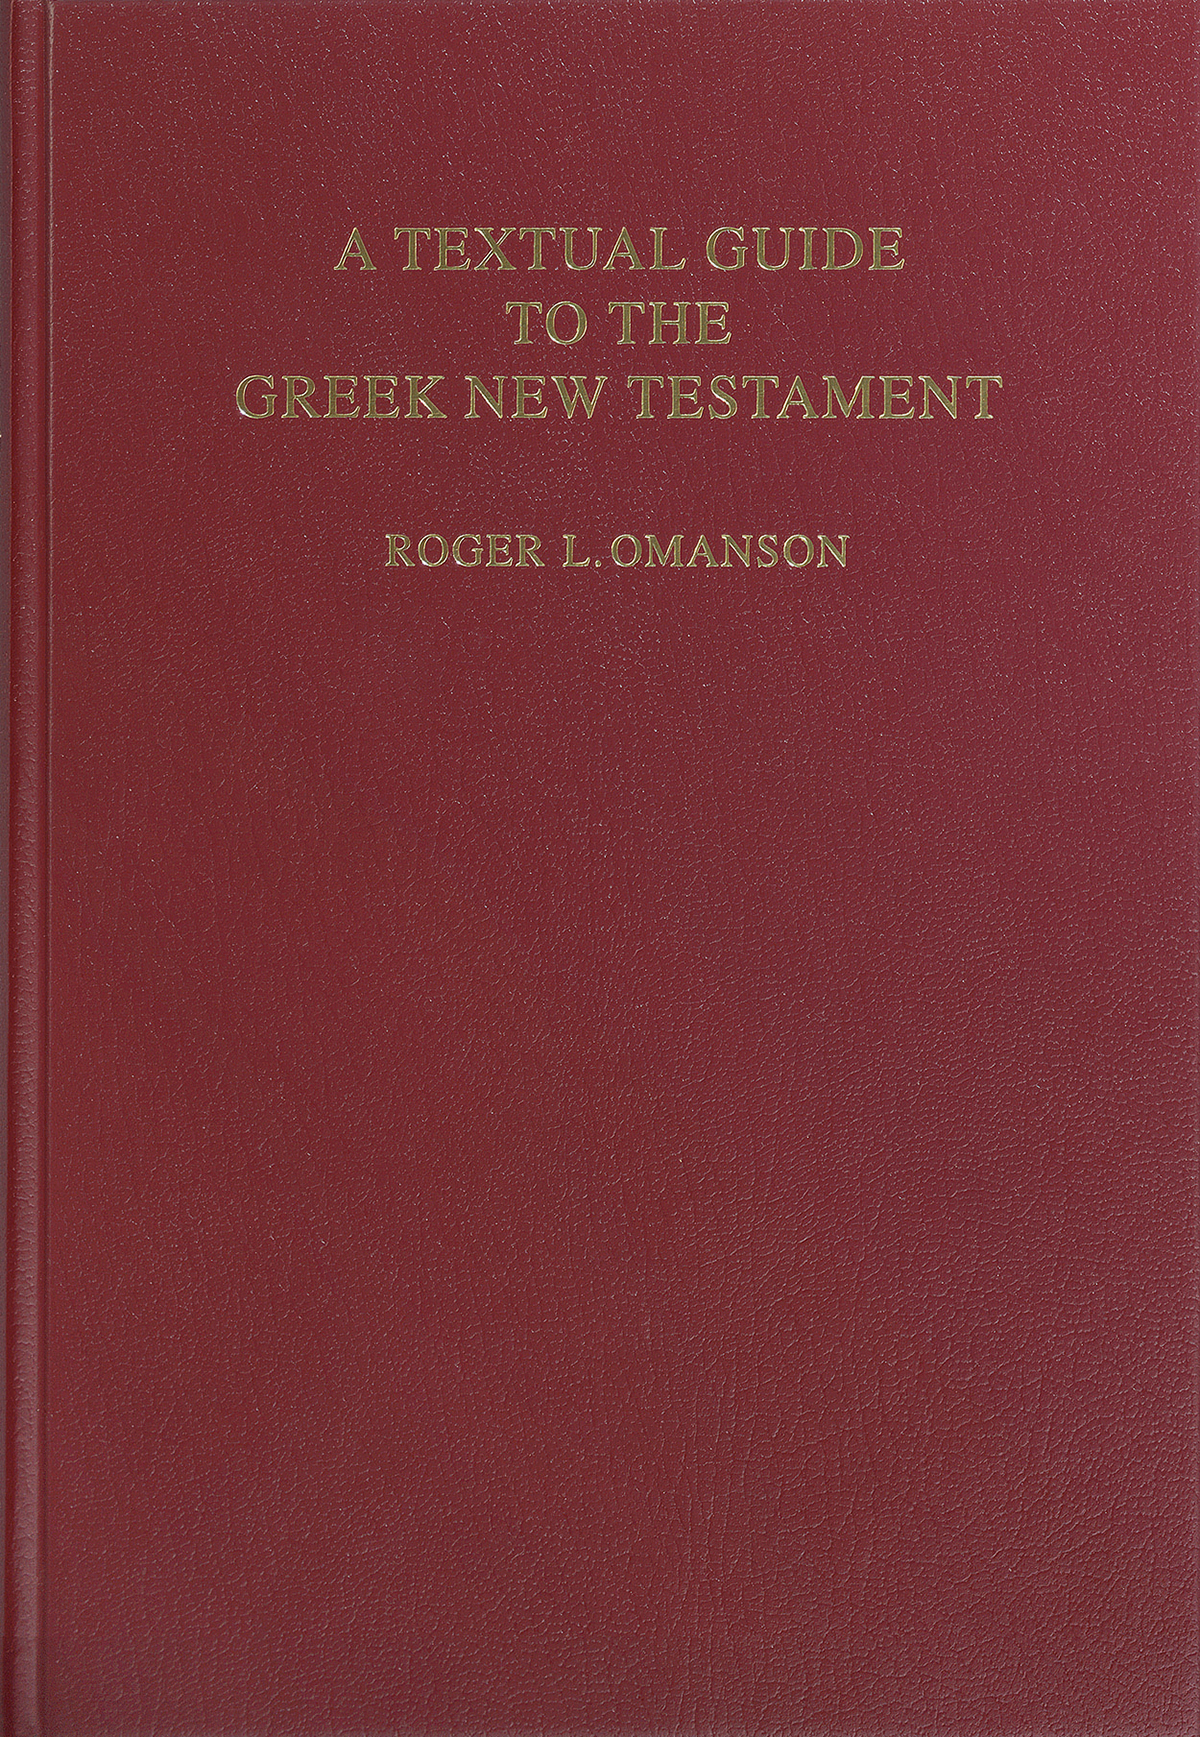  A Textual Guide to the Greek New Testament ed. Omanson 6044